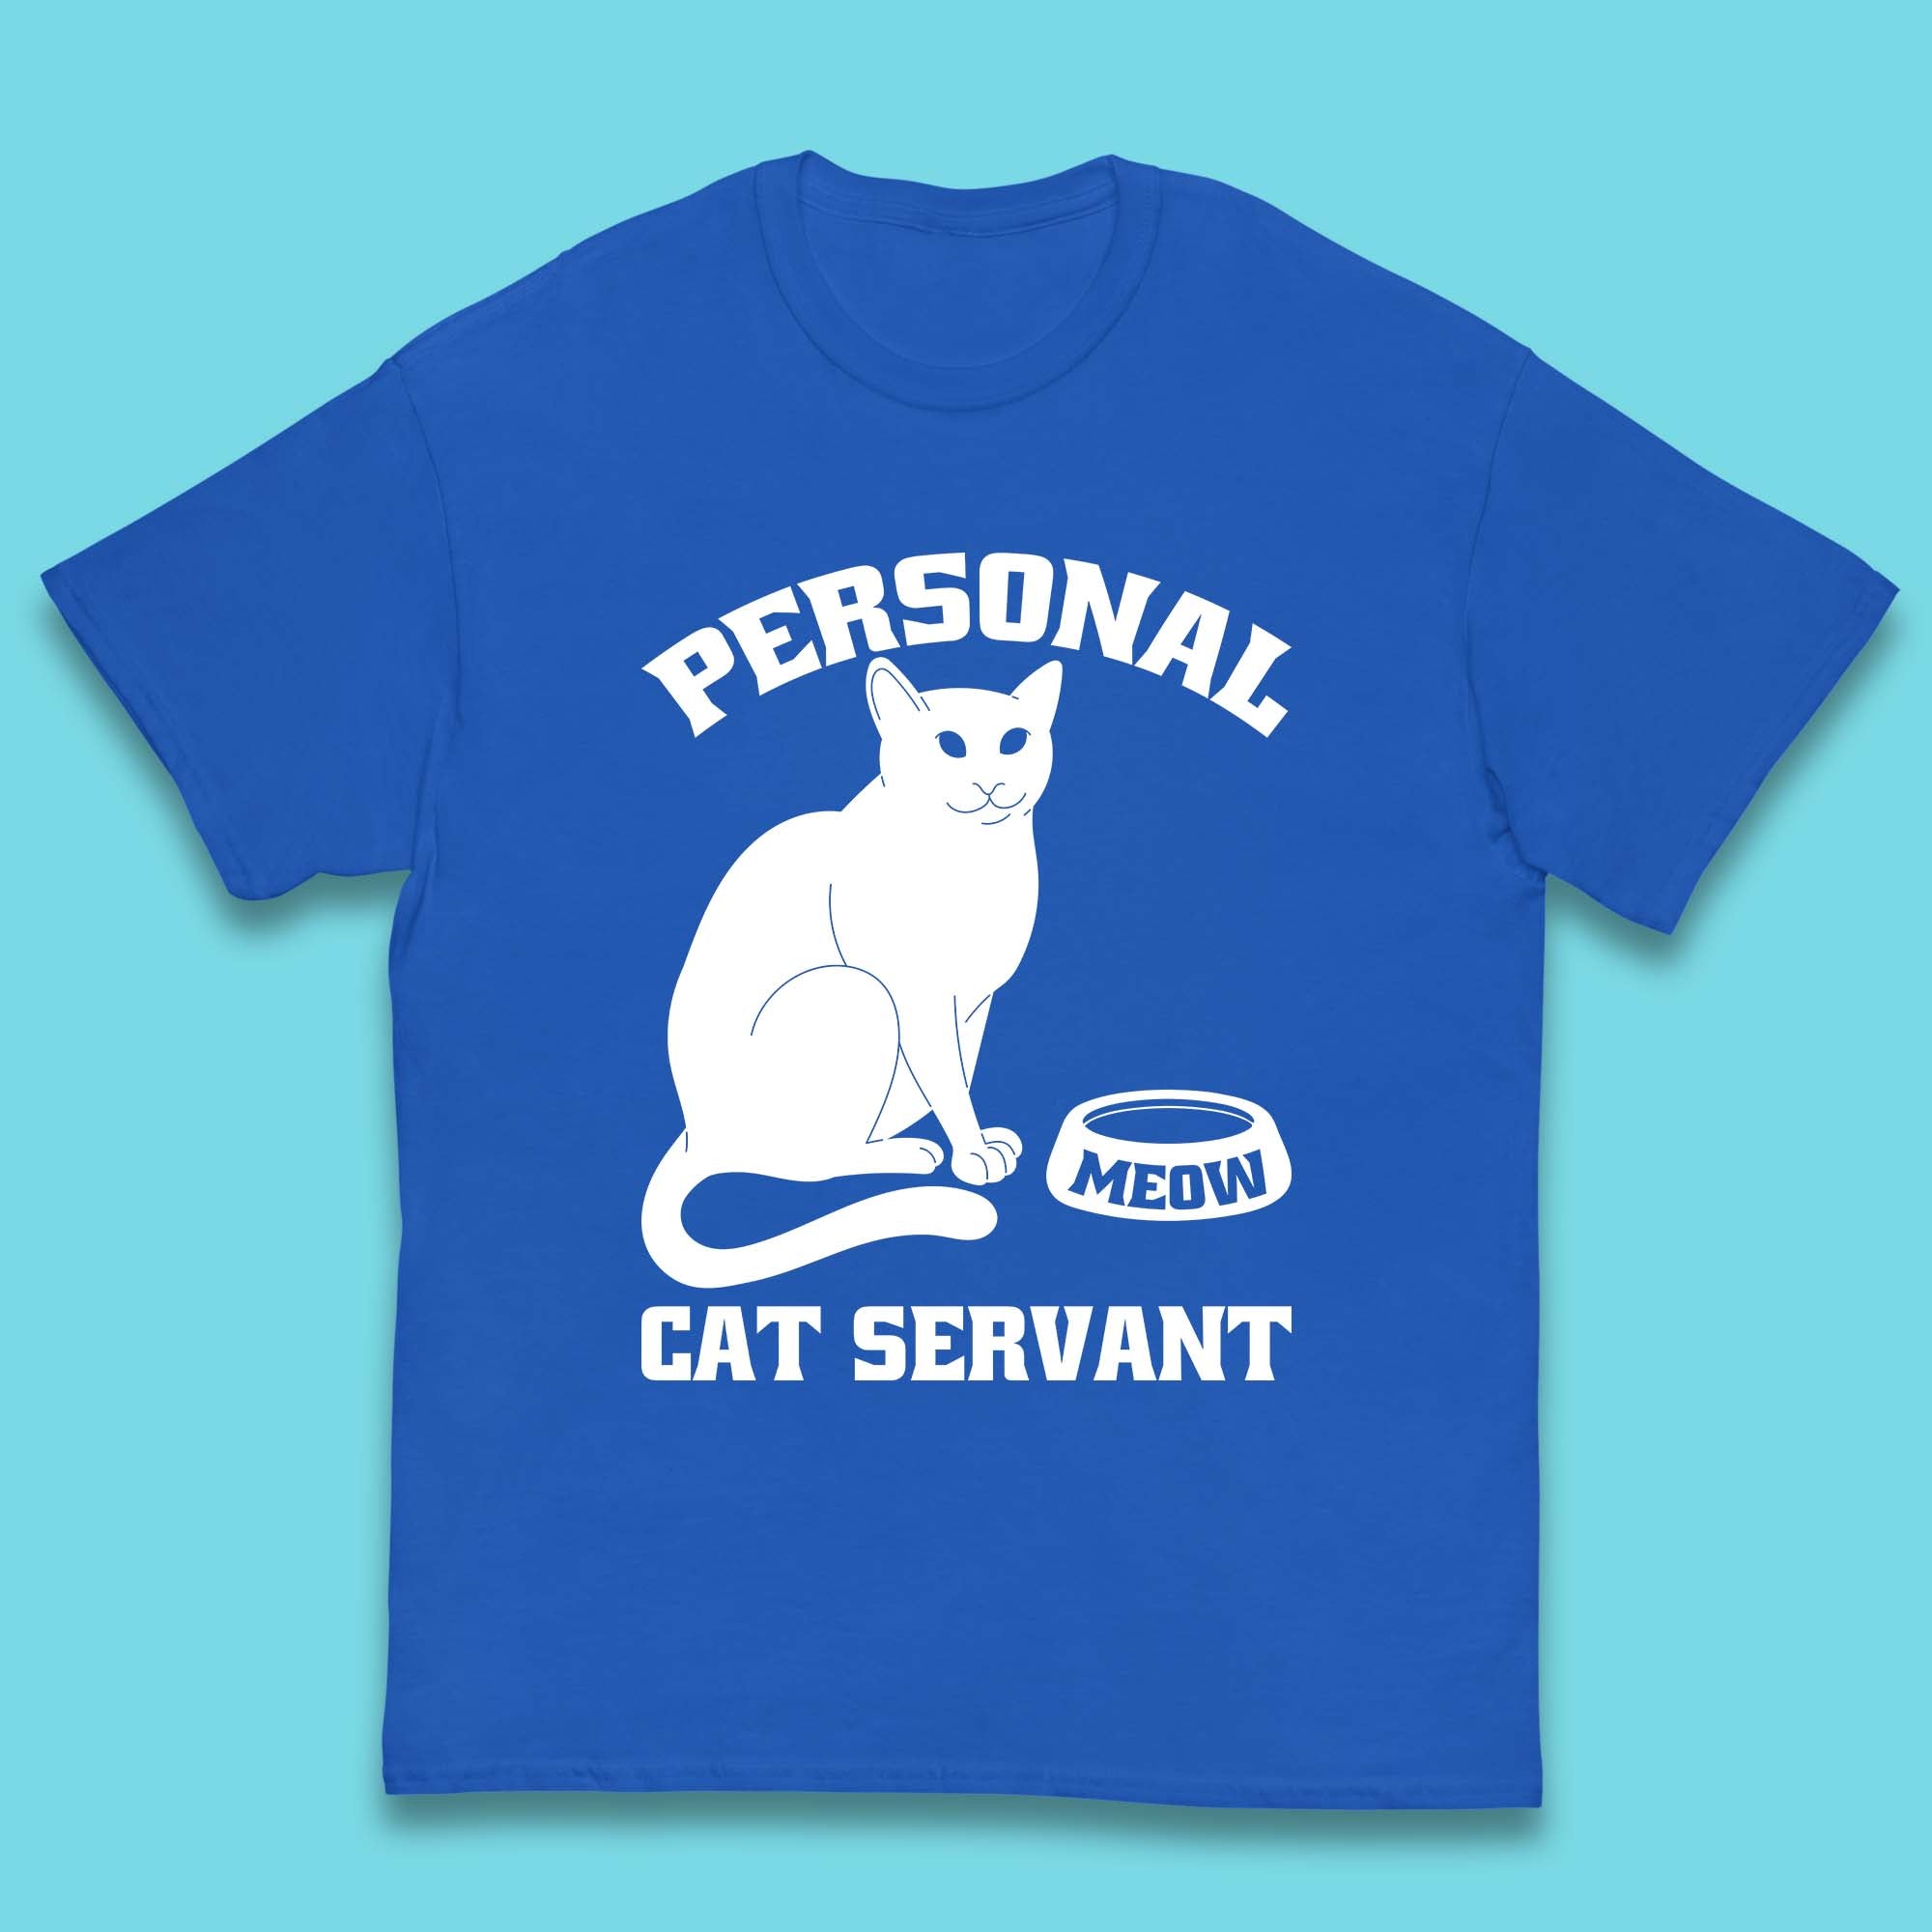 Personal Cat Servant Meow Funny Black Cat Lover Gift Kids T Shirt